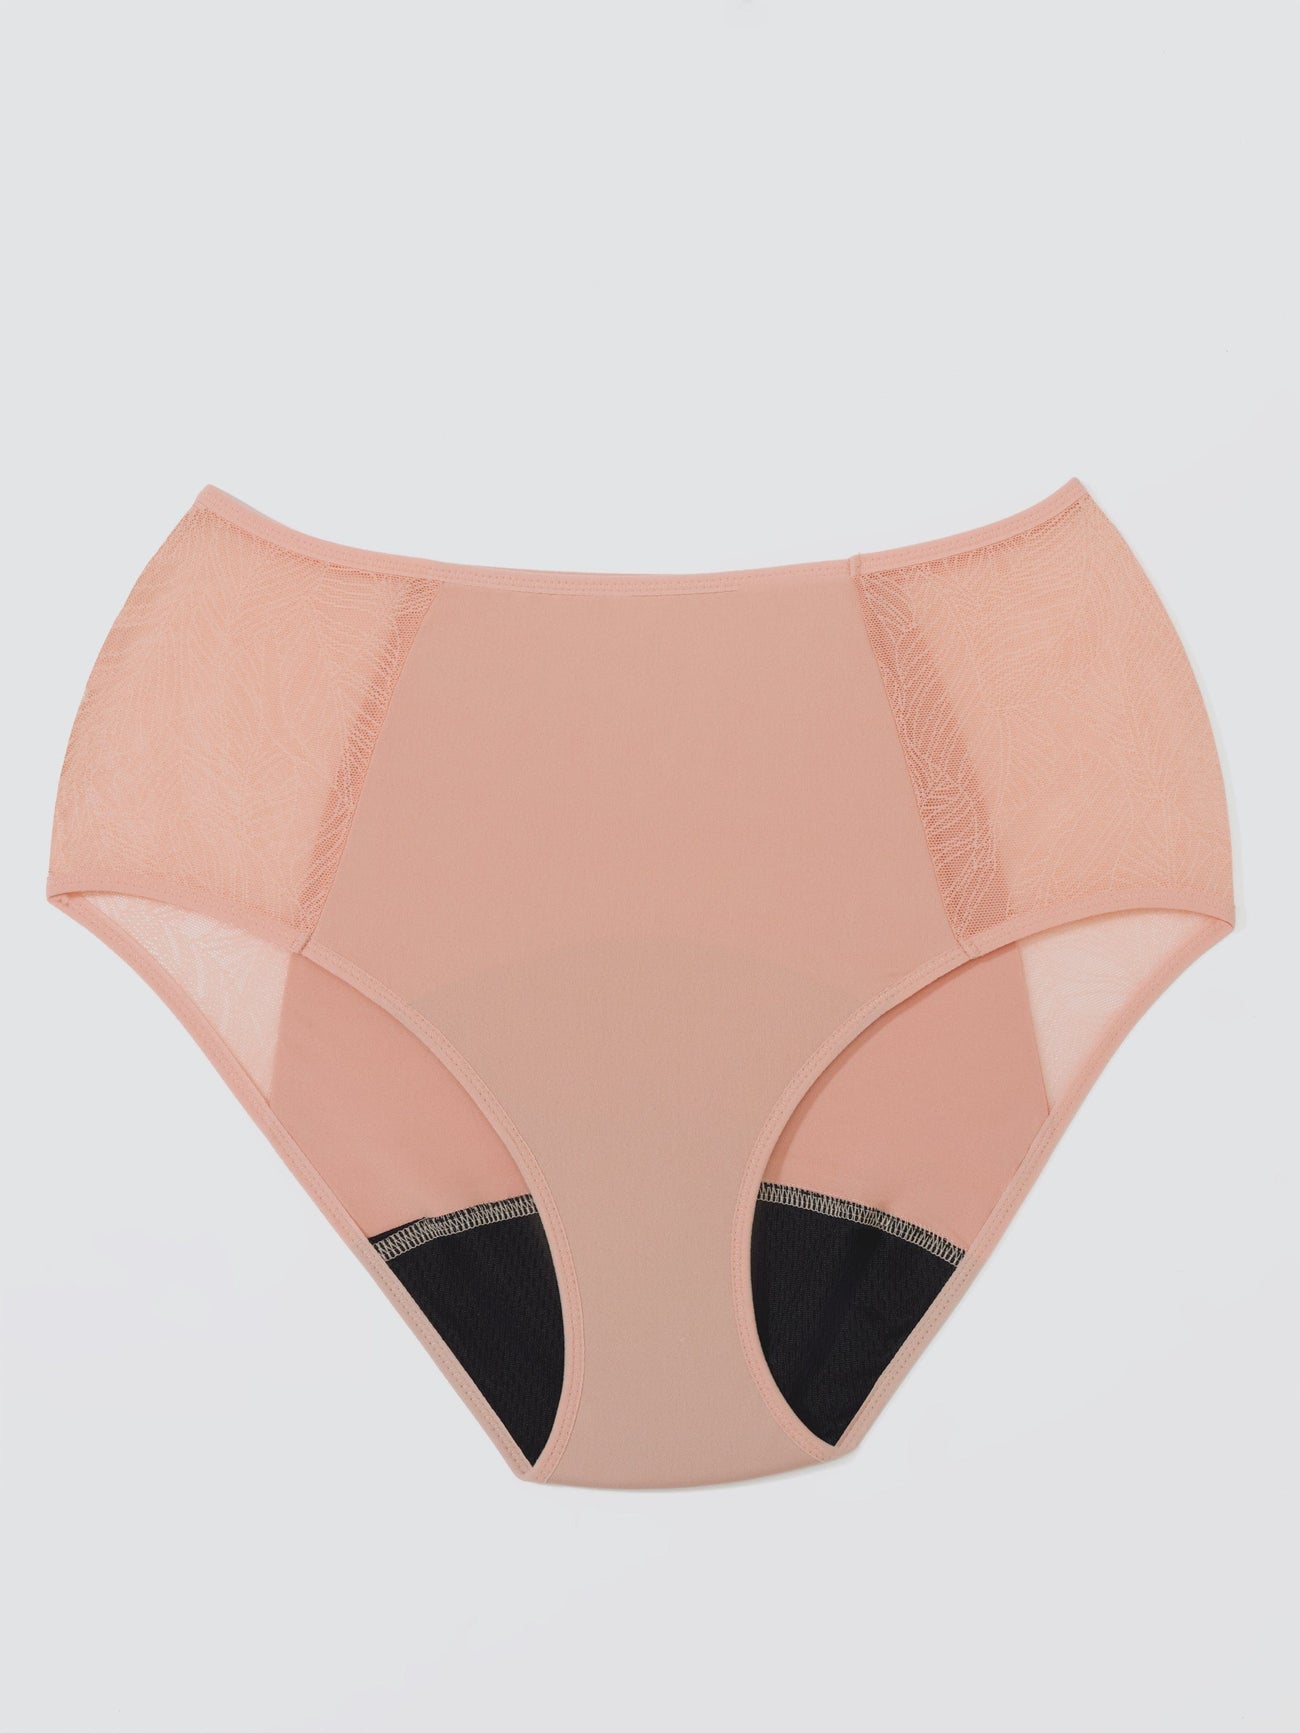 Spitze High-Waist - Recyceltes Nylon - Coral